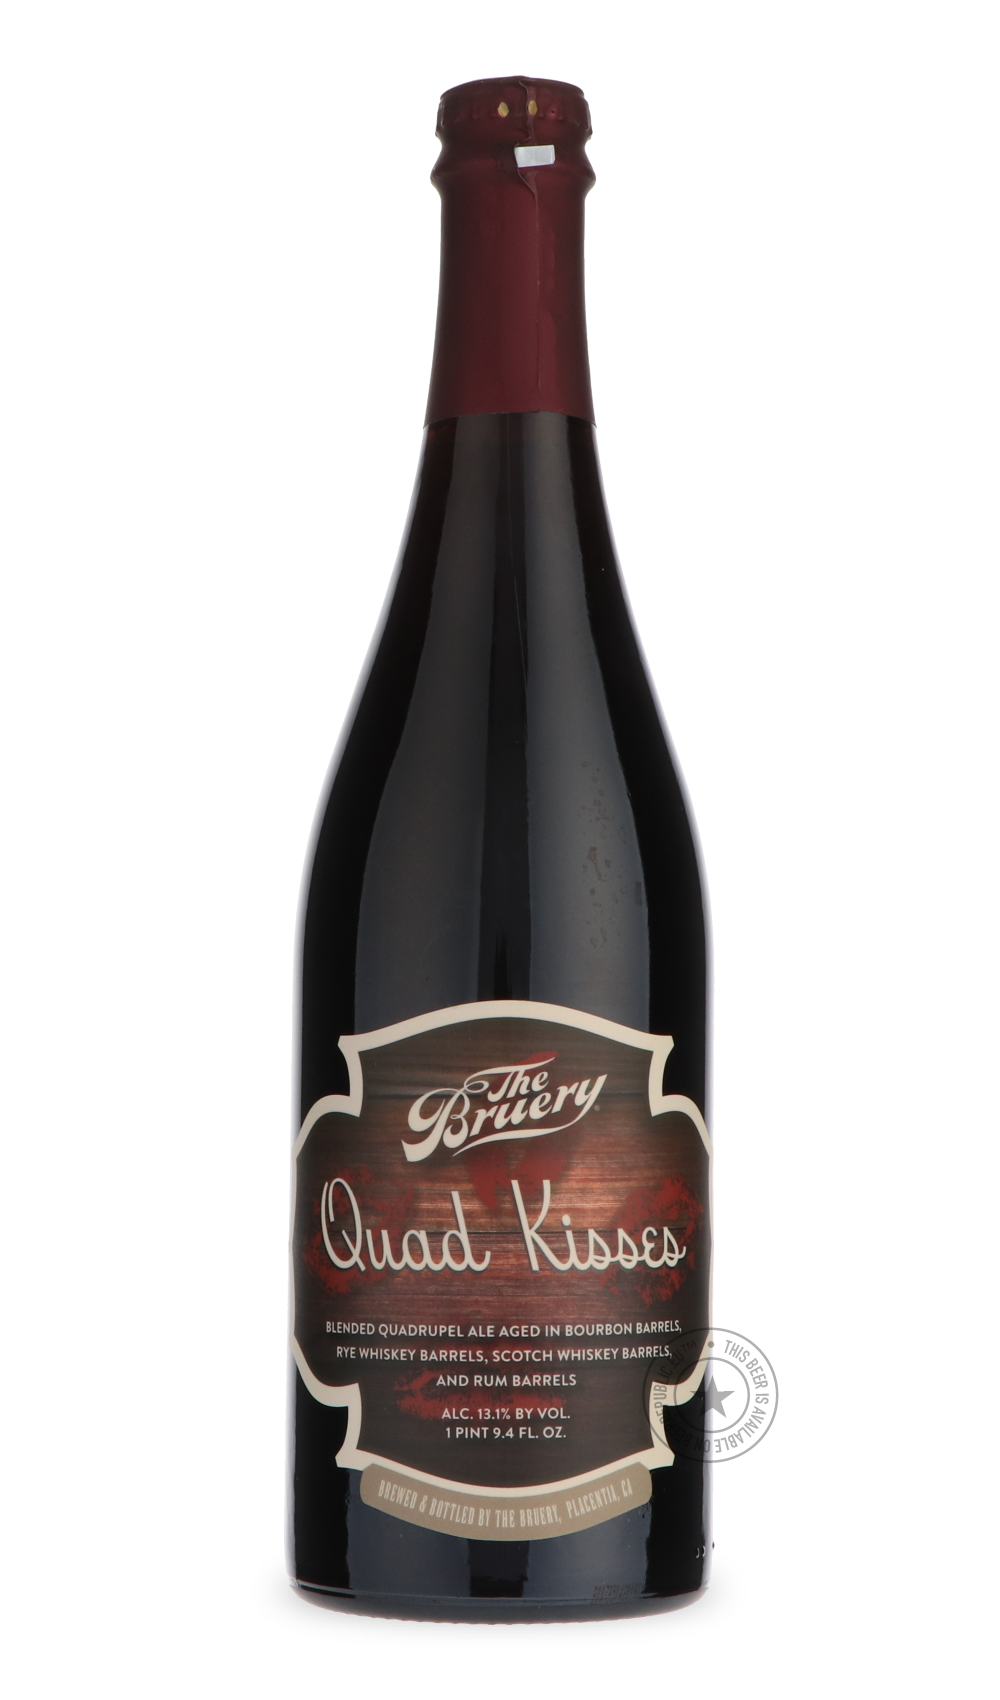 -The Bruery- Quad Kisses-Brown & Dark- Only @ Beer Republic - The best online beer store for American & Canadian craft beer - Buy beer online from the USA and Canada - Bier online kopen - Amerikaans bier kopen - Craft beer store - Craft beer kopen - Amerikanisch bier kaufen - Bier online kaufen - Acheter biere online - IPA - Stout - Porter - New England IPA - Hazy IPA - Imperial Stout - Barrel Aged - Barrel Aged Imperial Stout - Brown - Dark beer - Blond - Blonde - Pilsner - Lager - Wheat - Weizen - Amber -